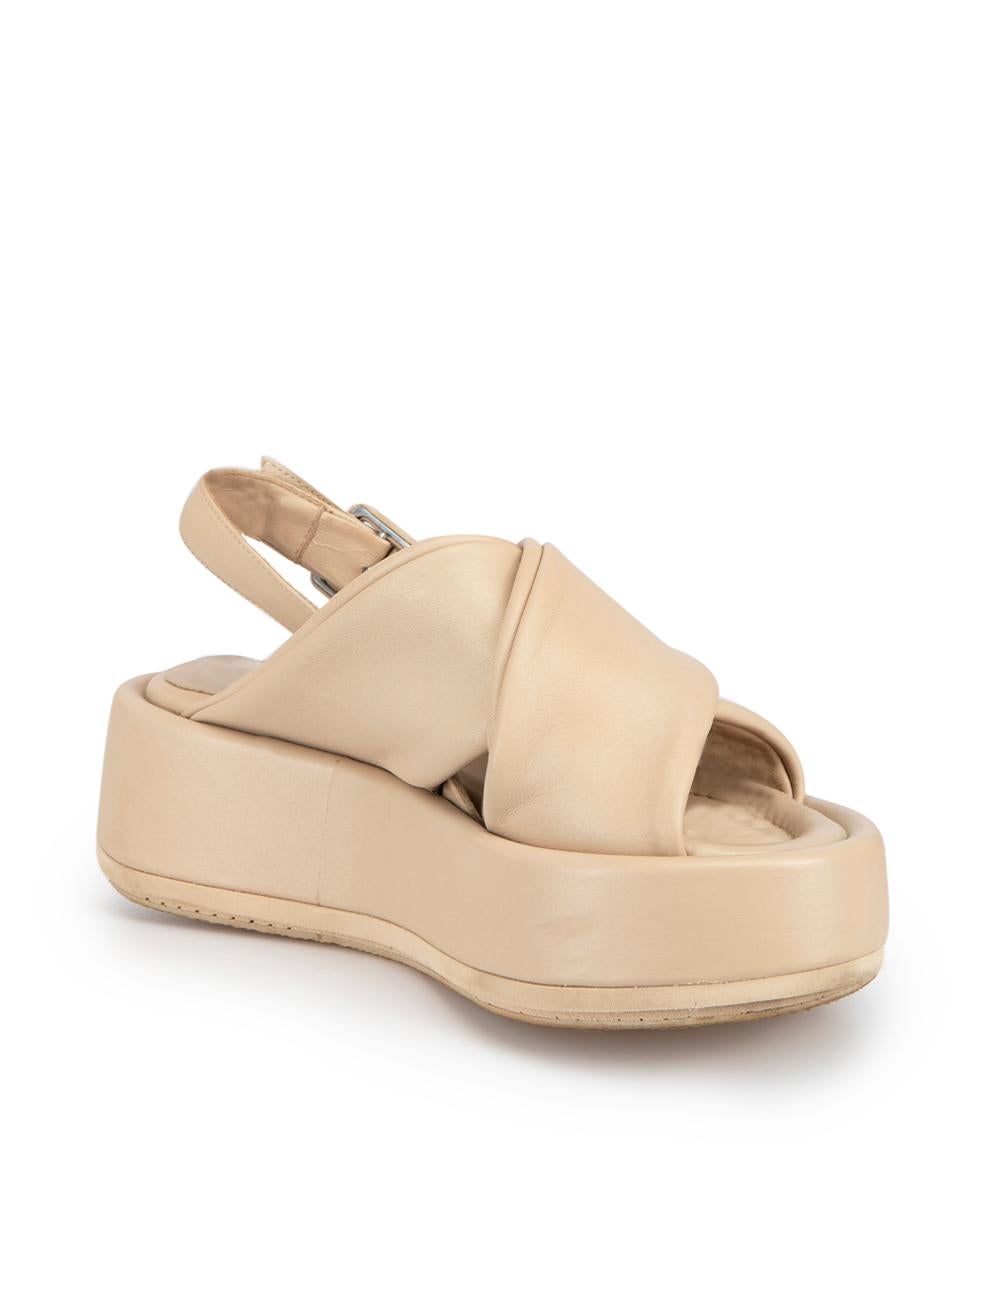 CONDITION is Very good. Minimal wear to shoes is evident. Minimal wear to both platforms with small scuffs and scratch marks on this used Paloma Barceló designer resale item.



Details


Beige

Leather

Flatform sandals

Adjustable slingback